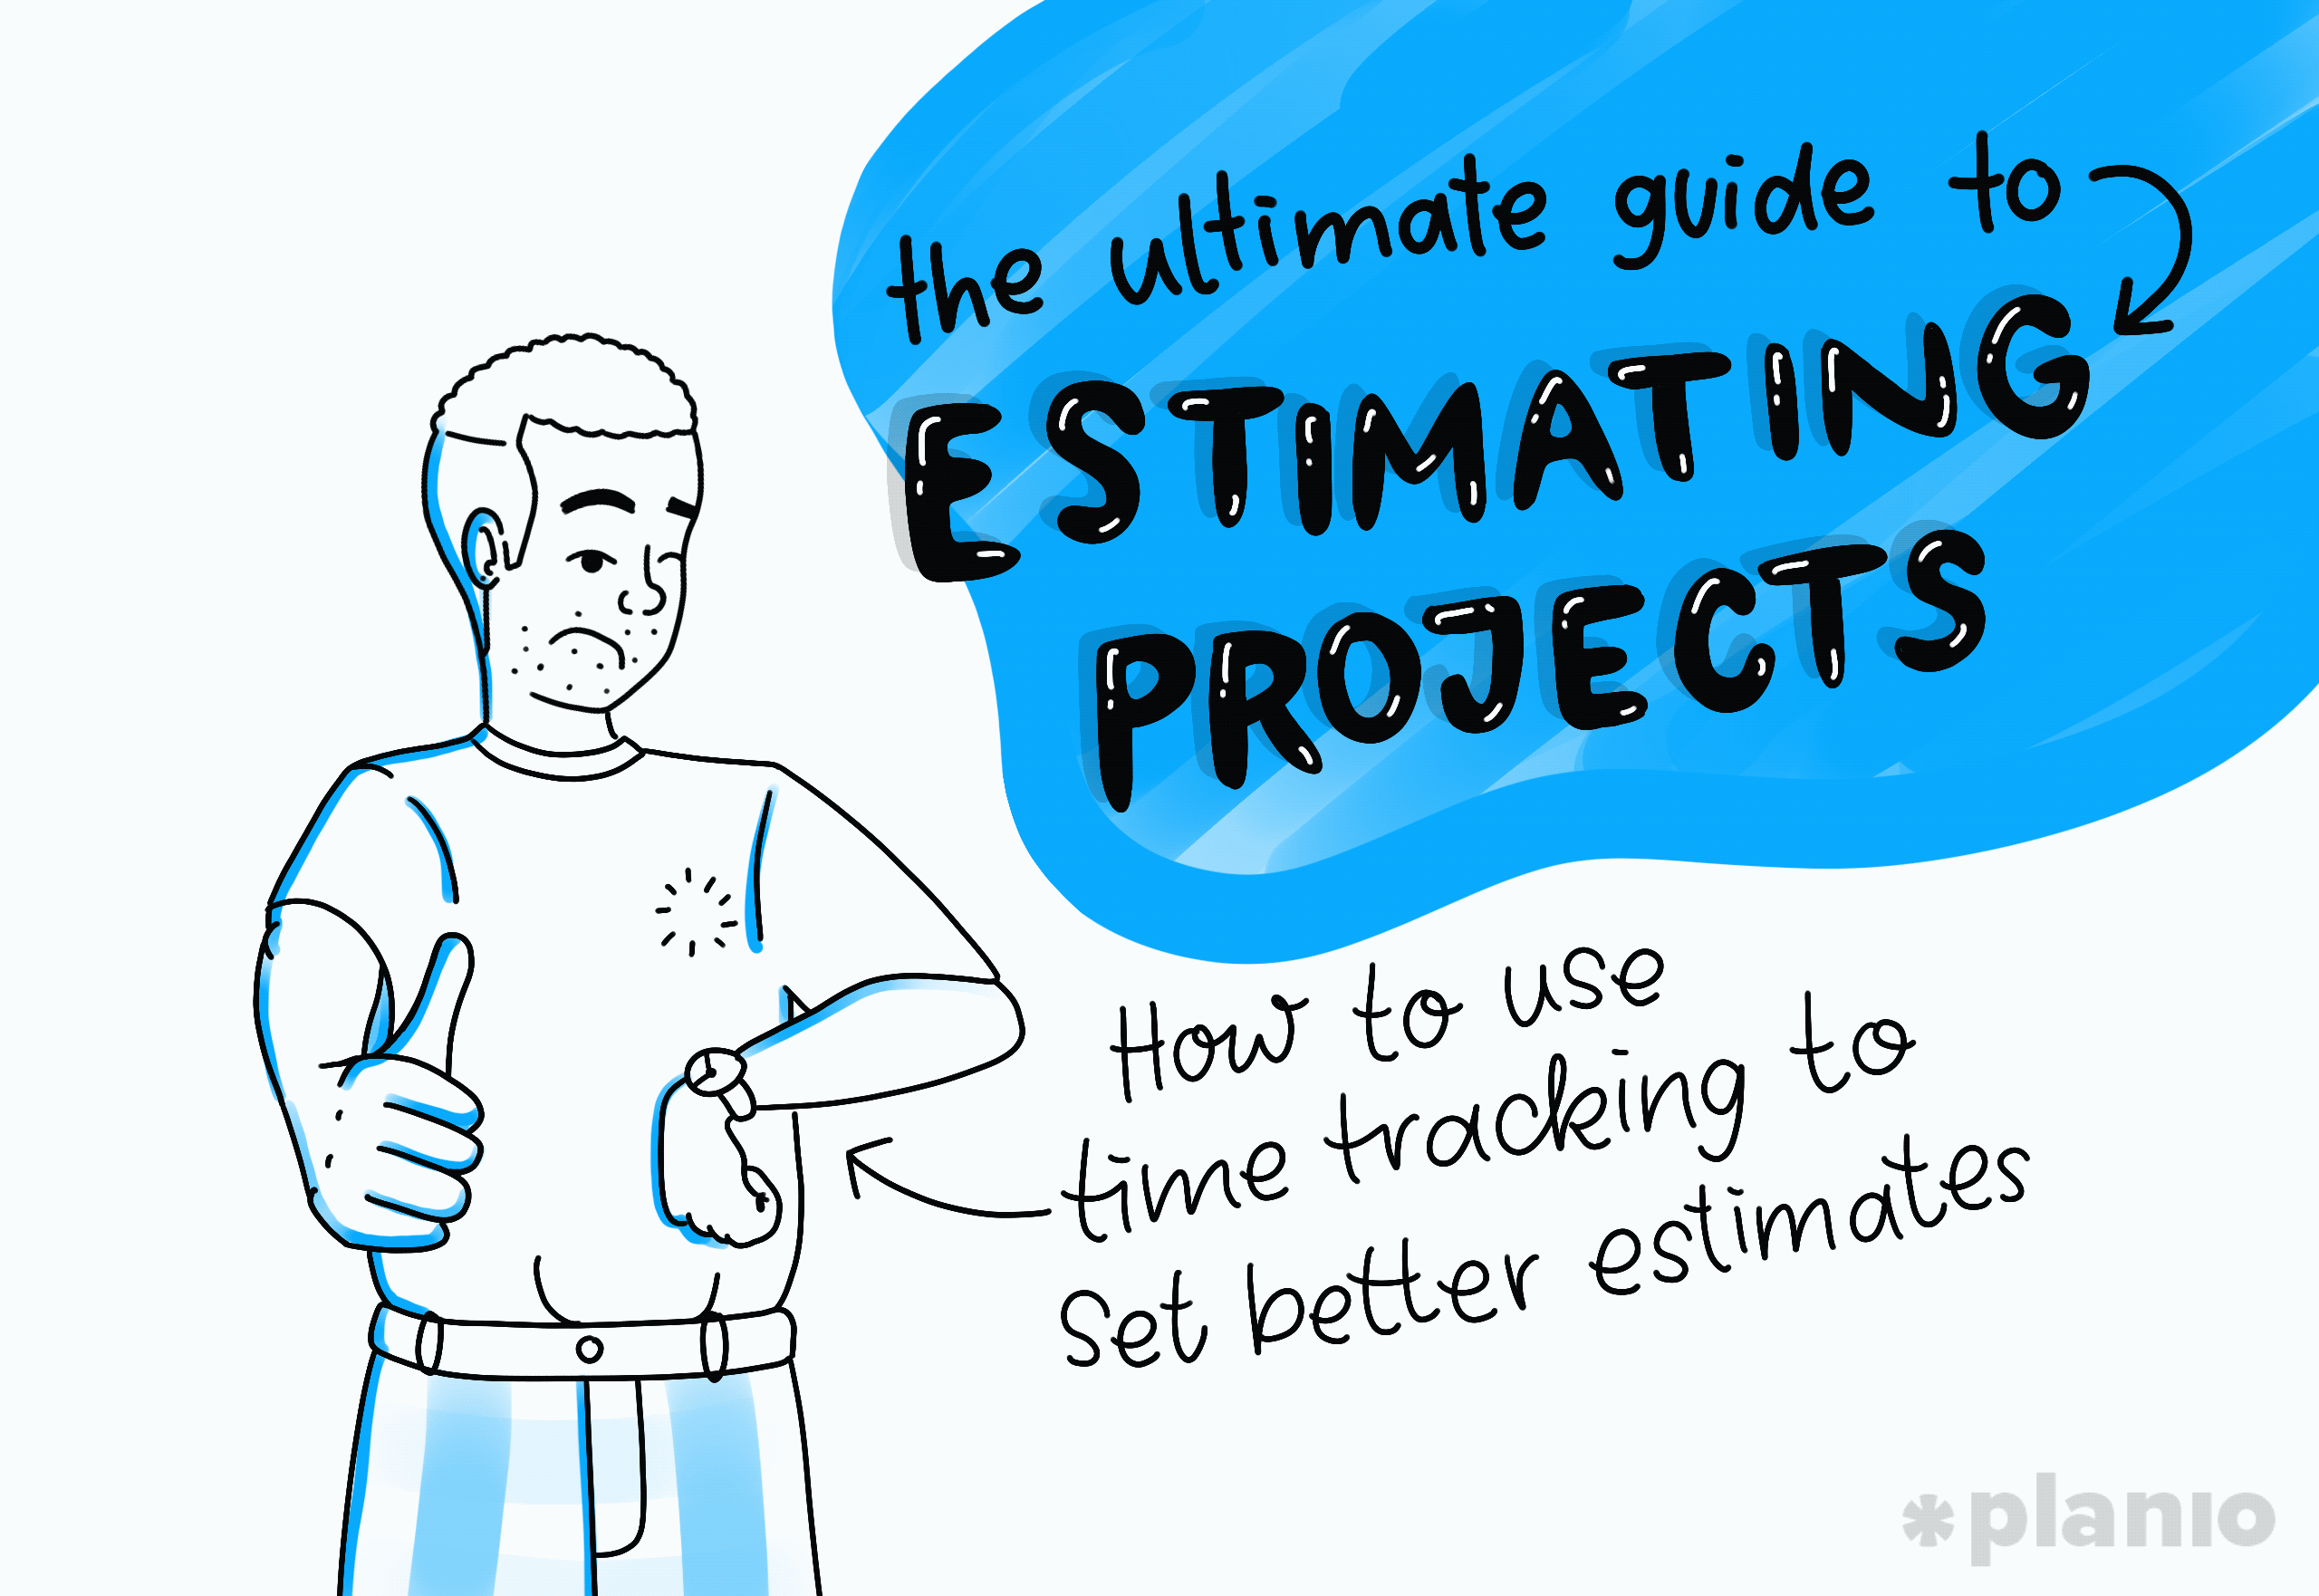 The Ultimate Guide to Estimating Projects: How to use time tracking (and experience) to set better estimates